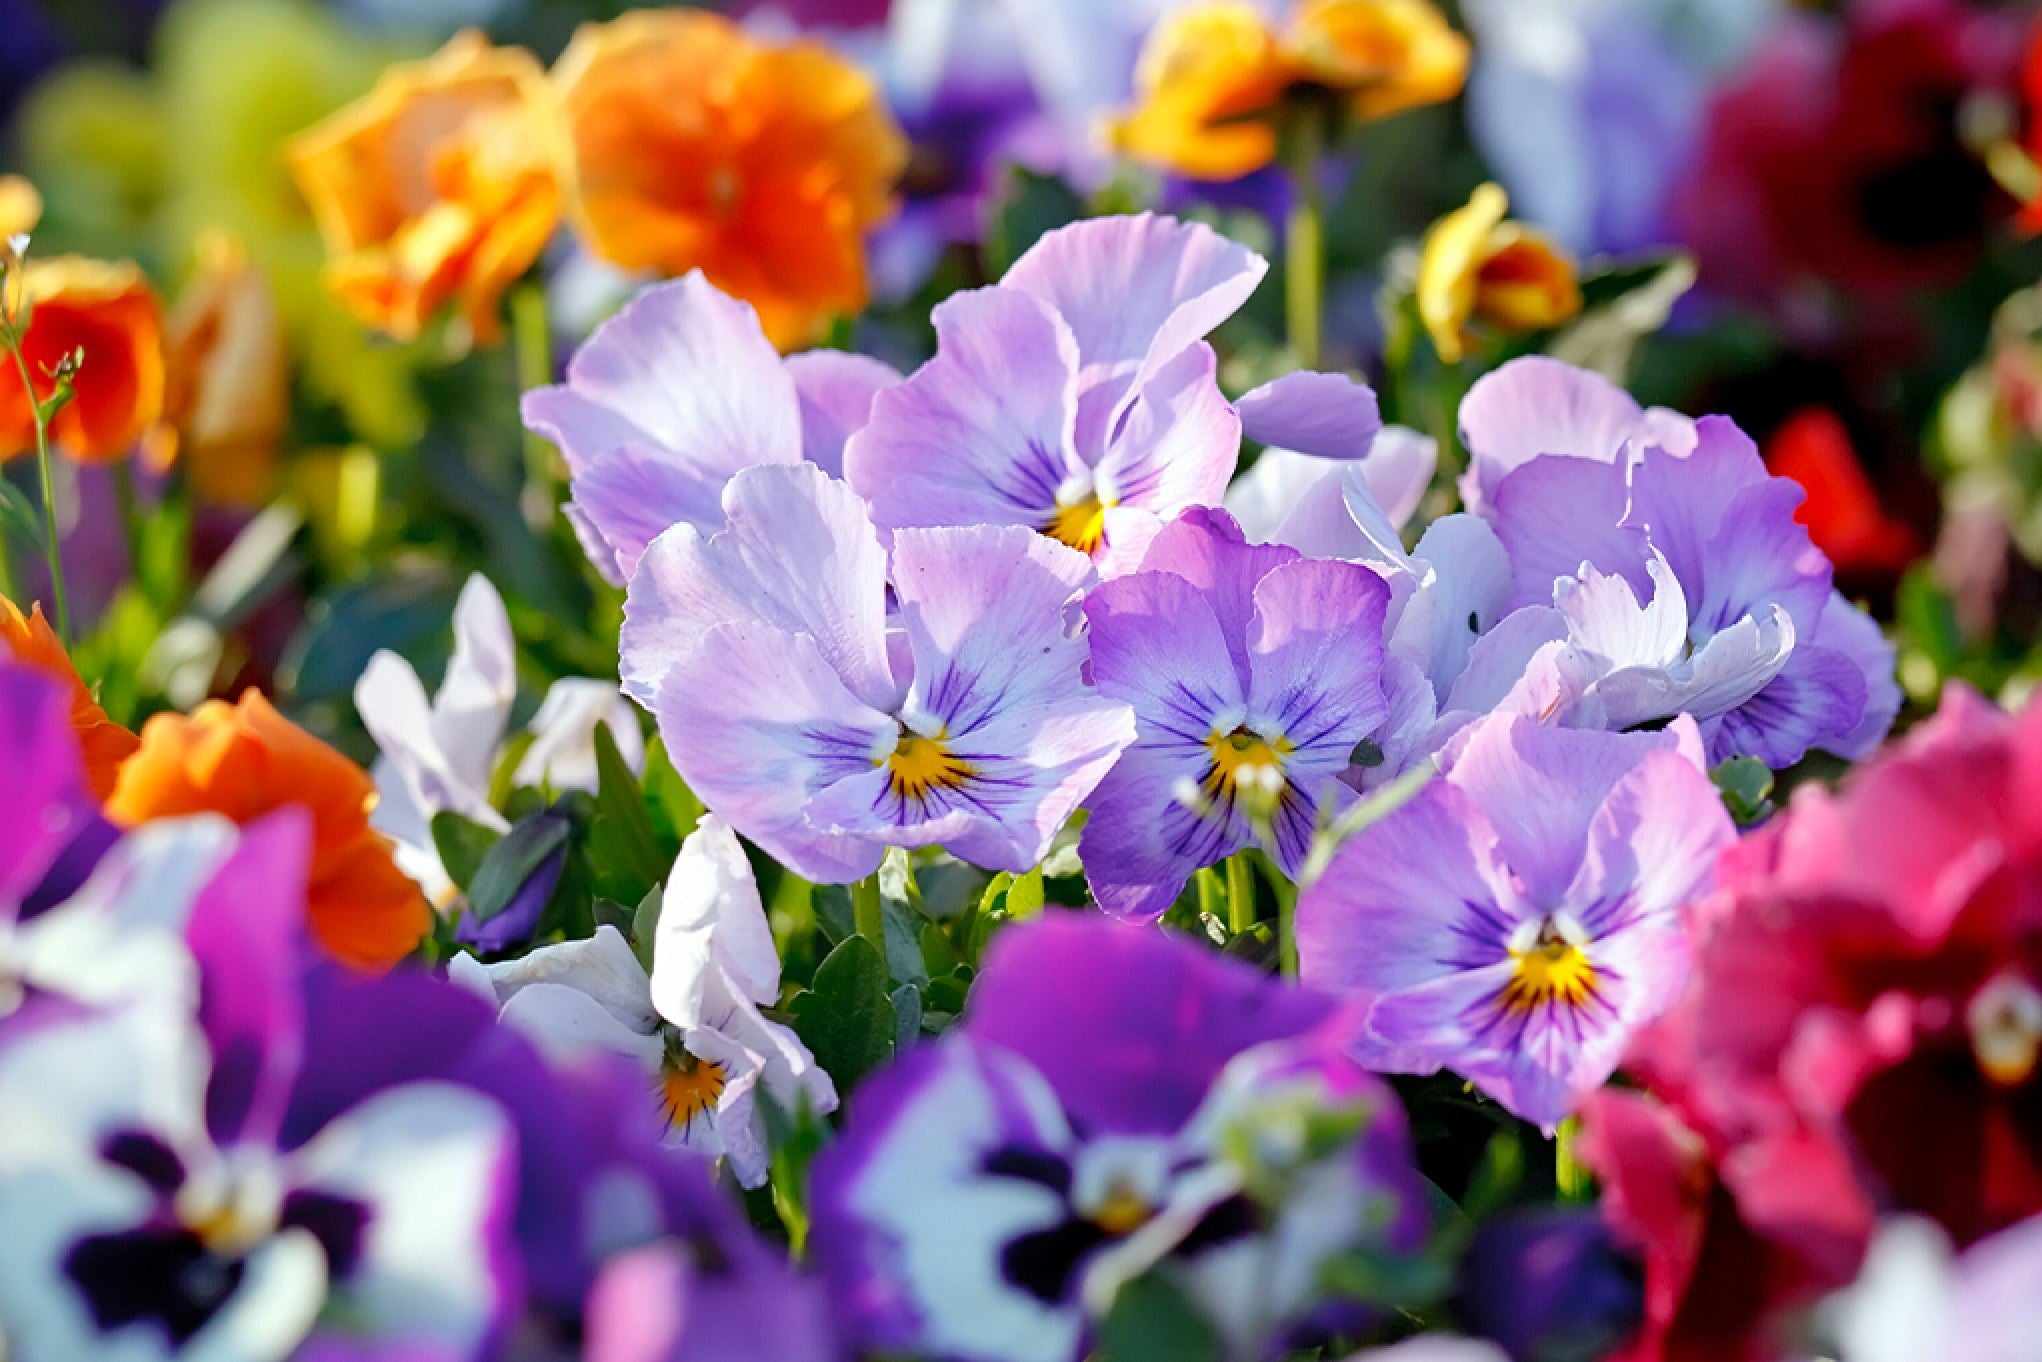 Beginner's guide to Bedding plants – Plants For All Seasons